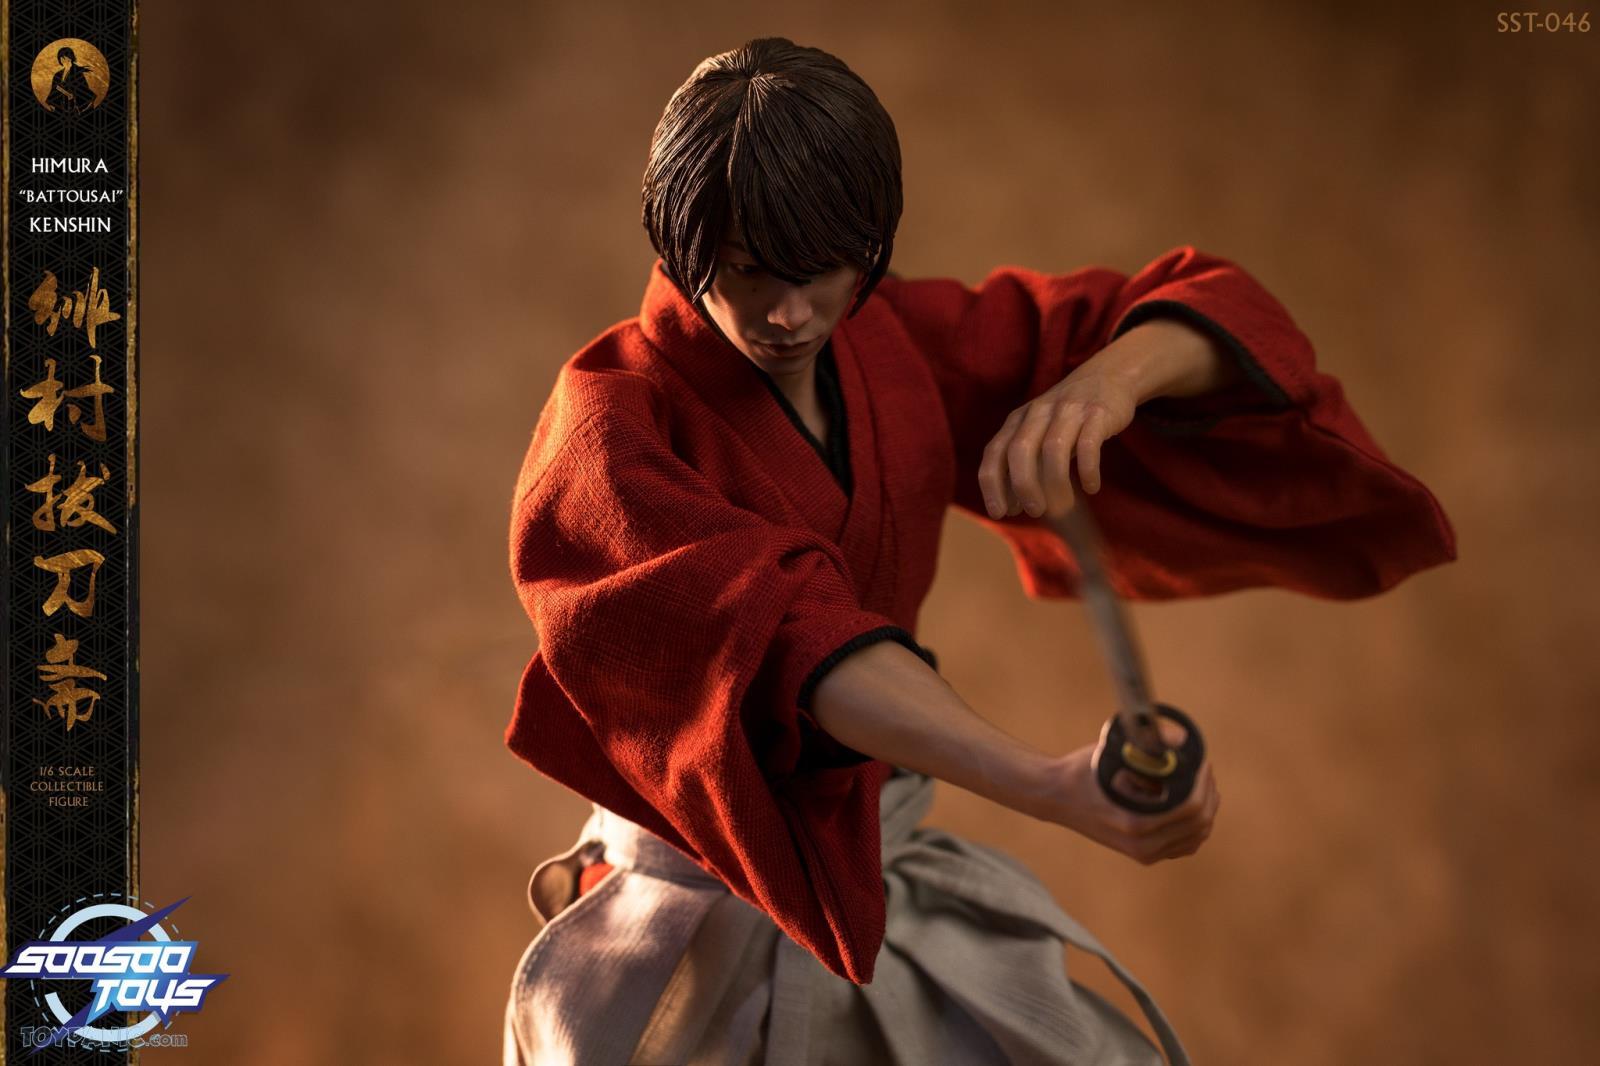 japanese - NEW PRODUCT: 1/6 scale Rurouni Kenshin Collectible Figure from SooSooToys 712202251230PM_8826835